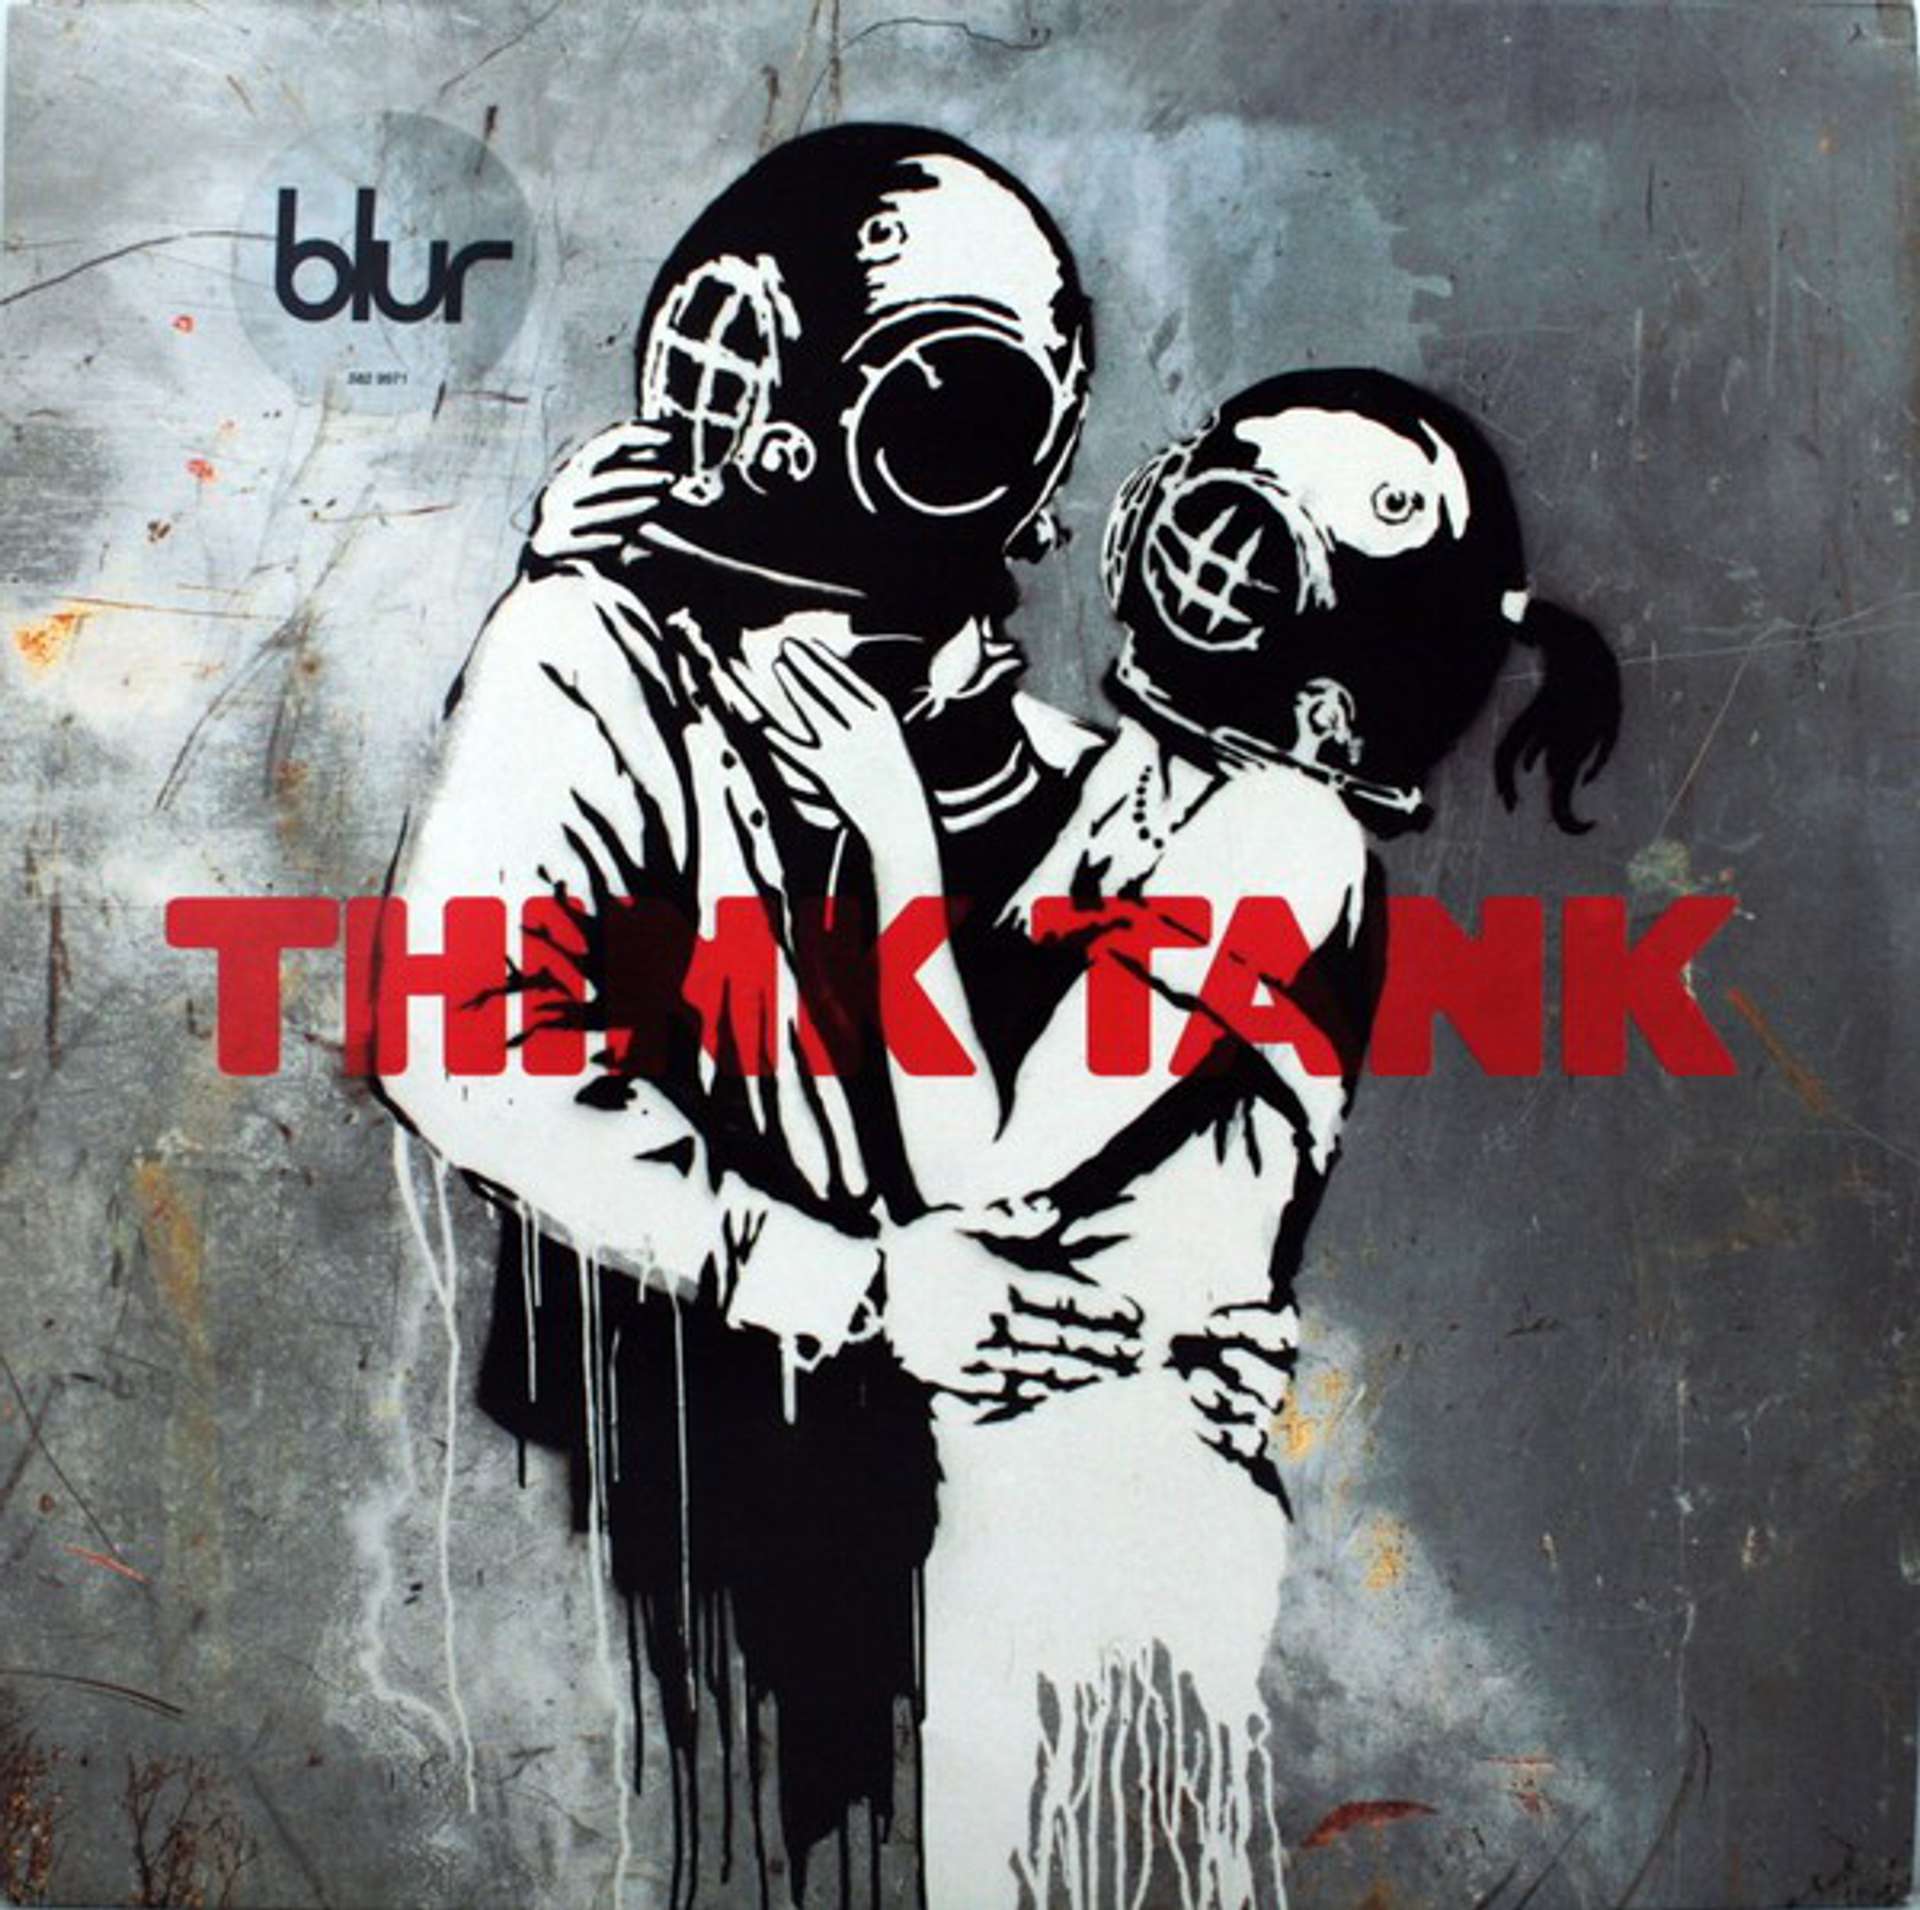 An image of the album cover for Think Tank, done by artist Banksy. It depicts a black-and-white stencil of a couple embracing whilst wearing deep sea diving helmets.